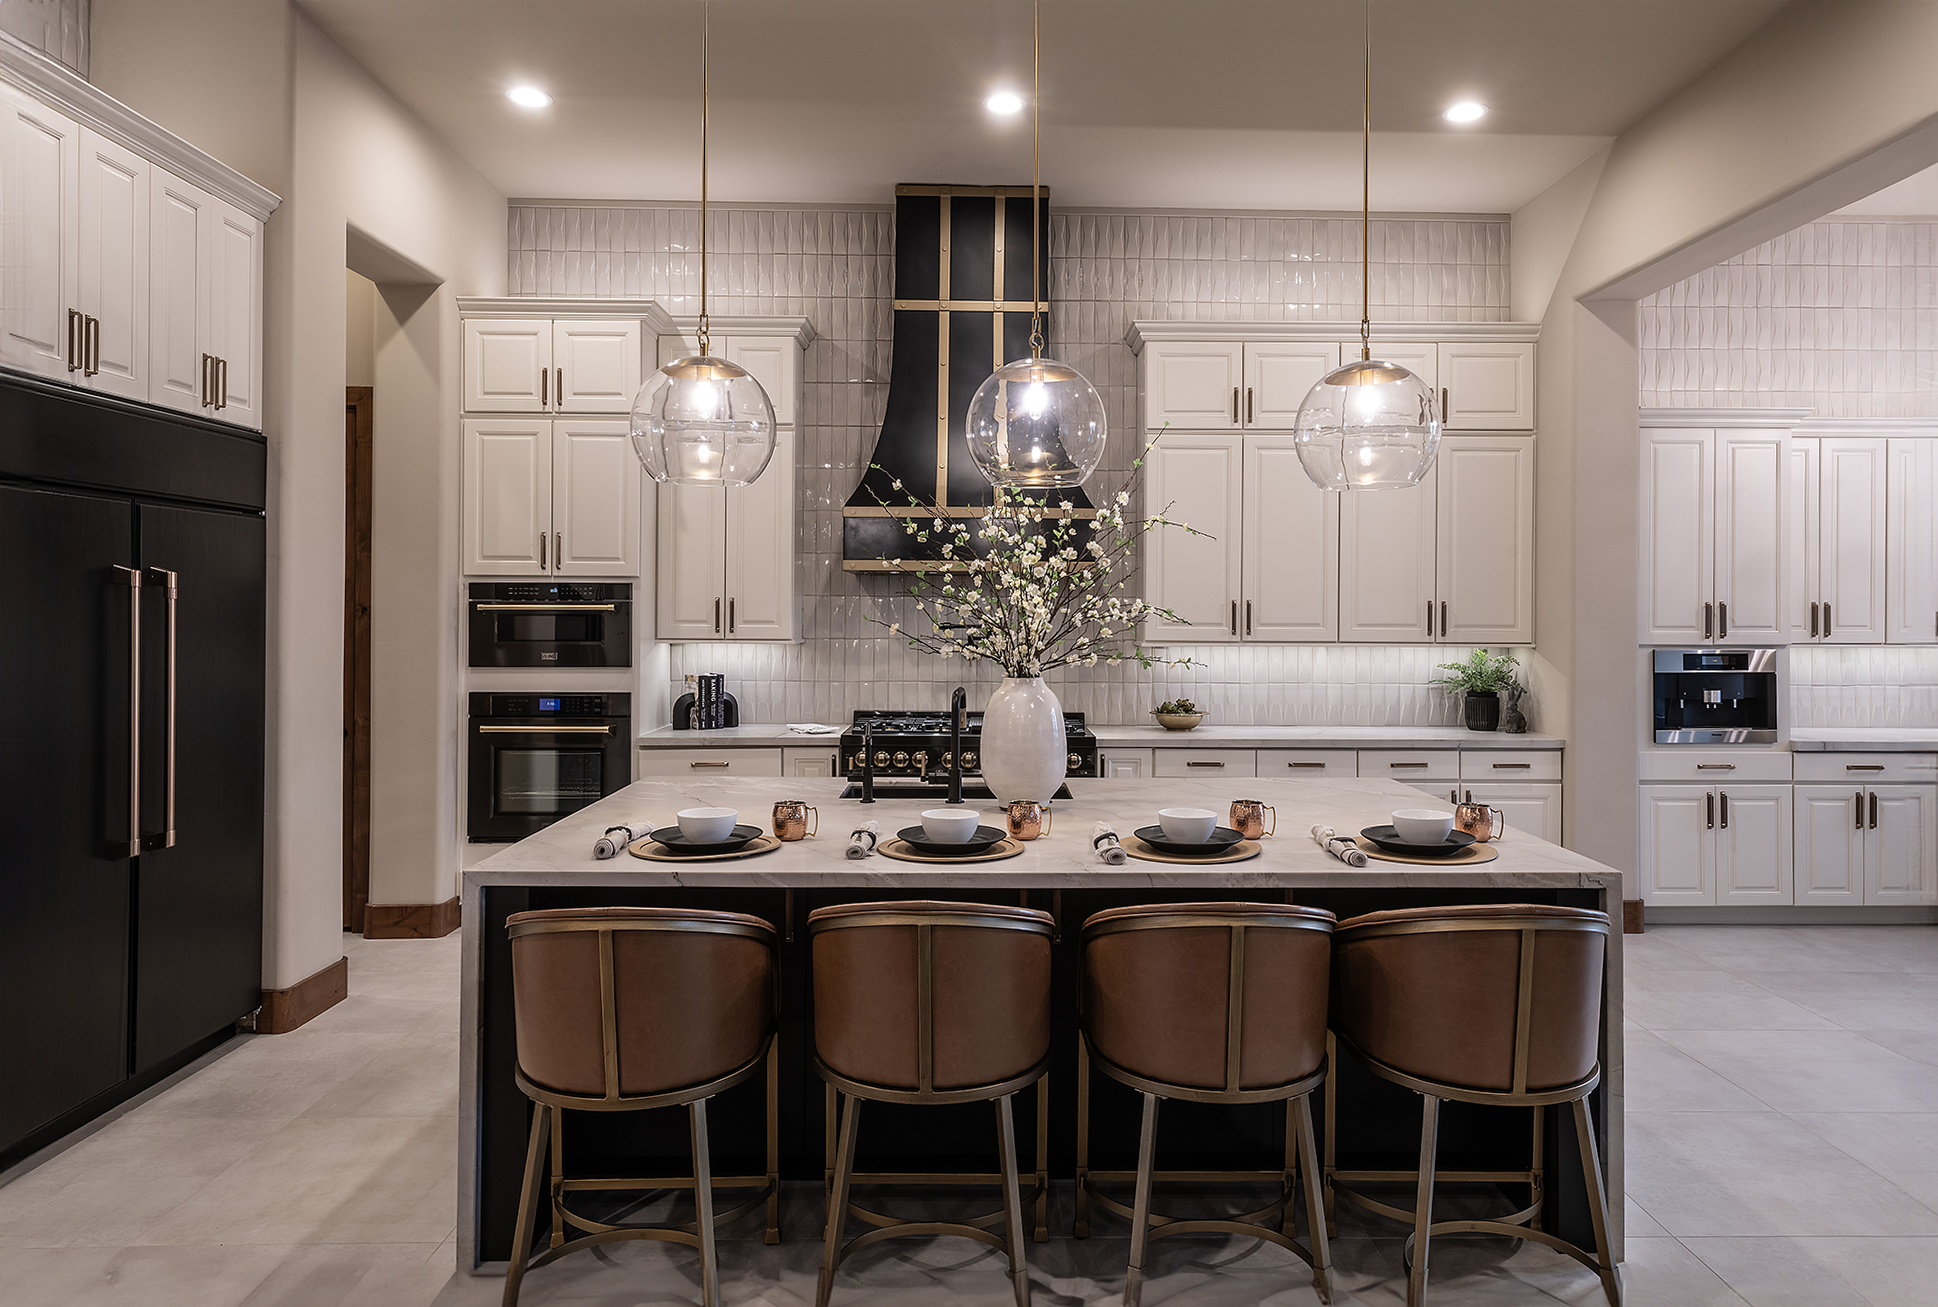 A modern kitchen with white cabinets, a central island with five leather stools, three pendant lights, and stainless steel appliances. A vase with flowers decorates the island.